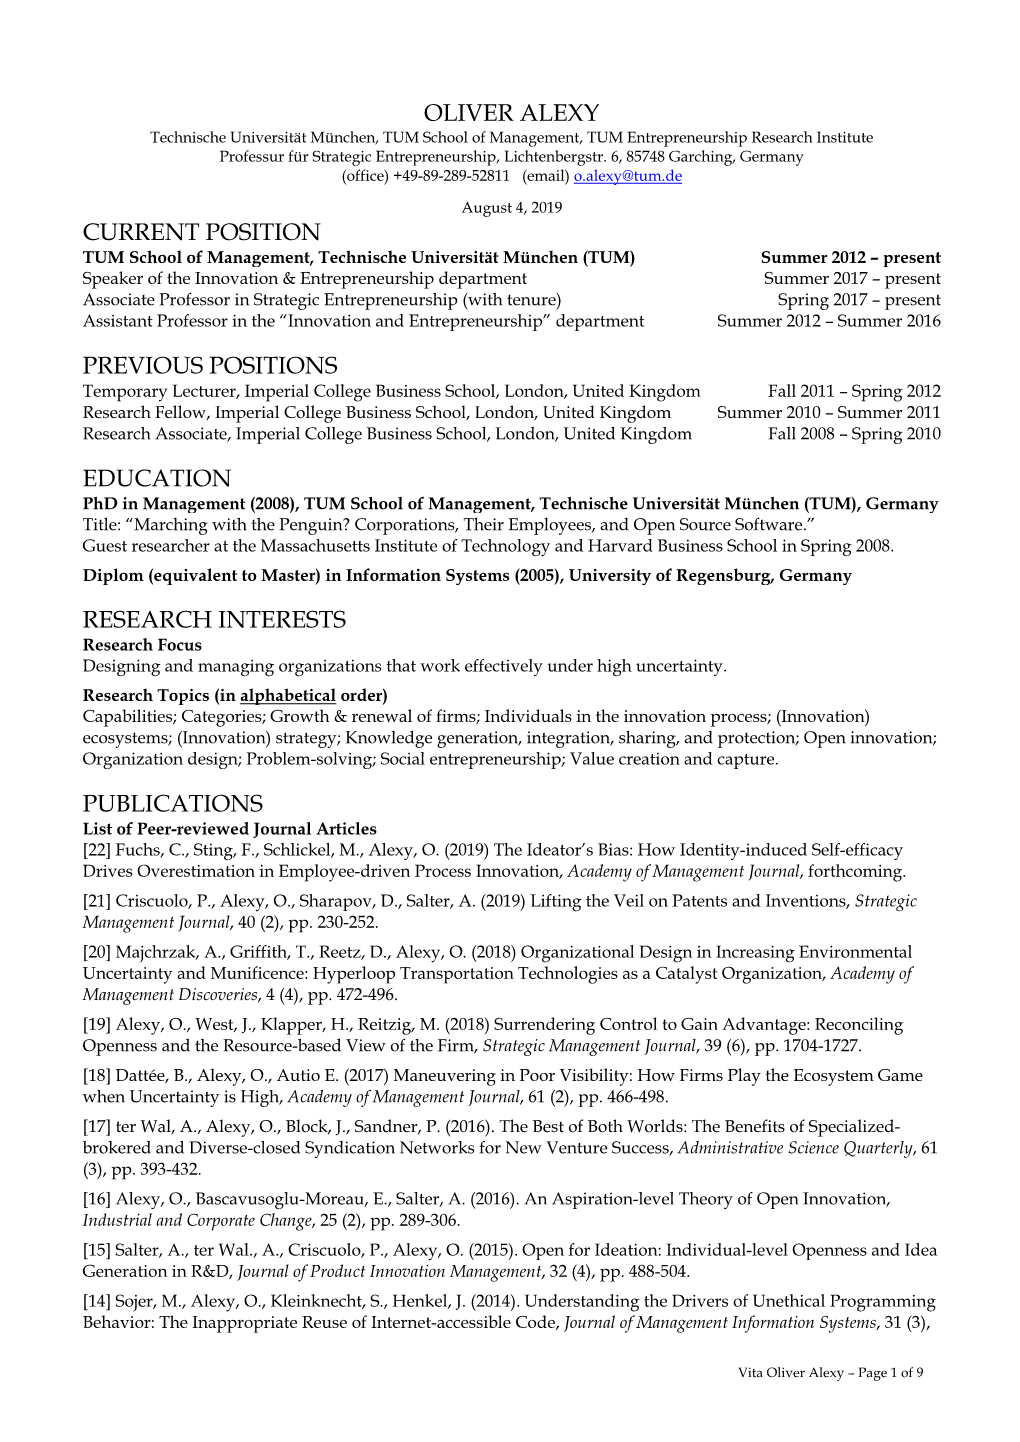 Vita Oliver Alexy – Page 1 of 9 Pp